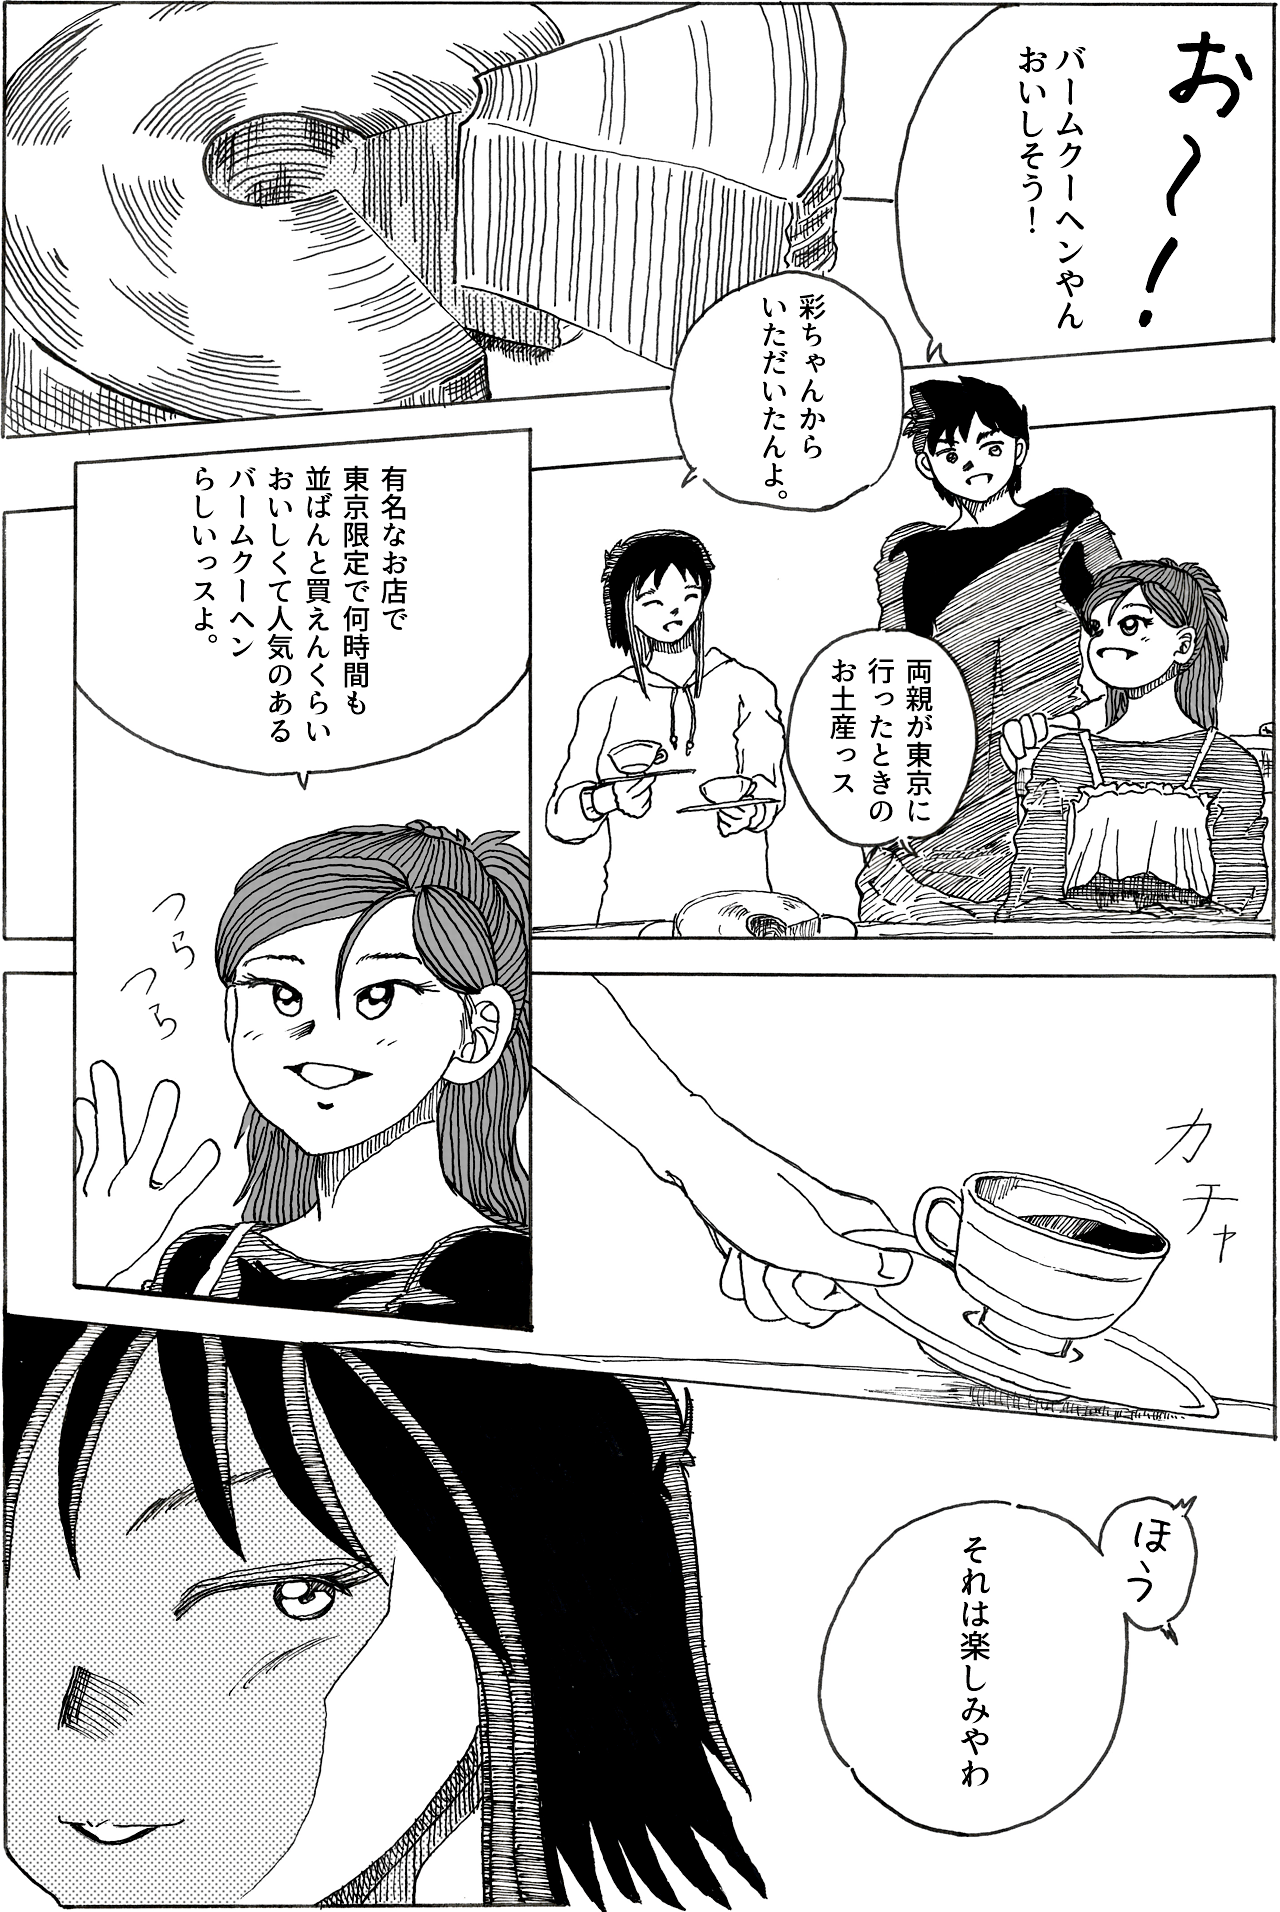 img-s06-page02-min.png